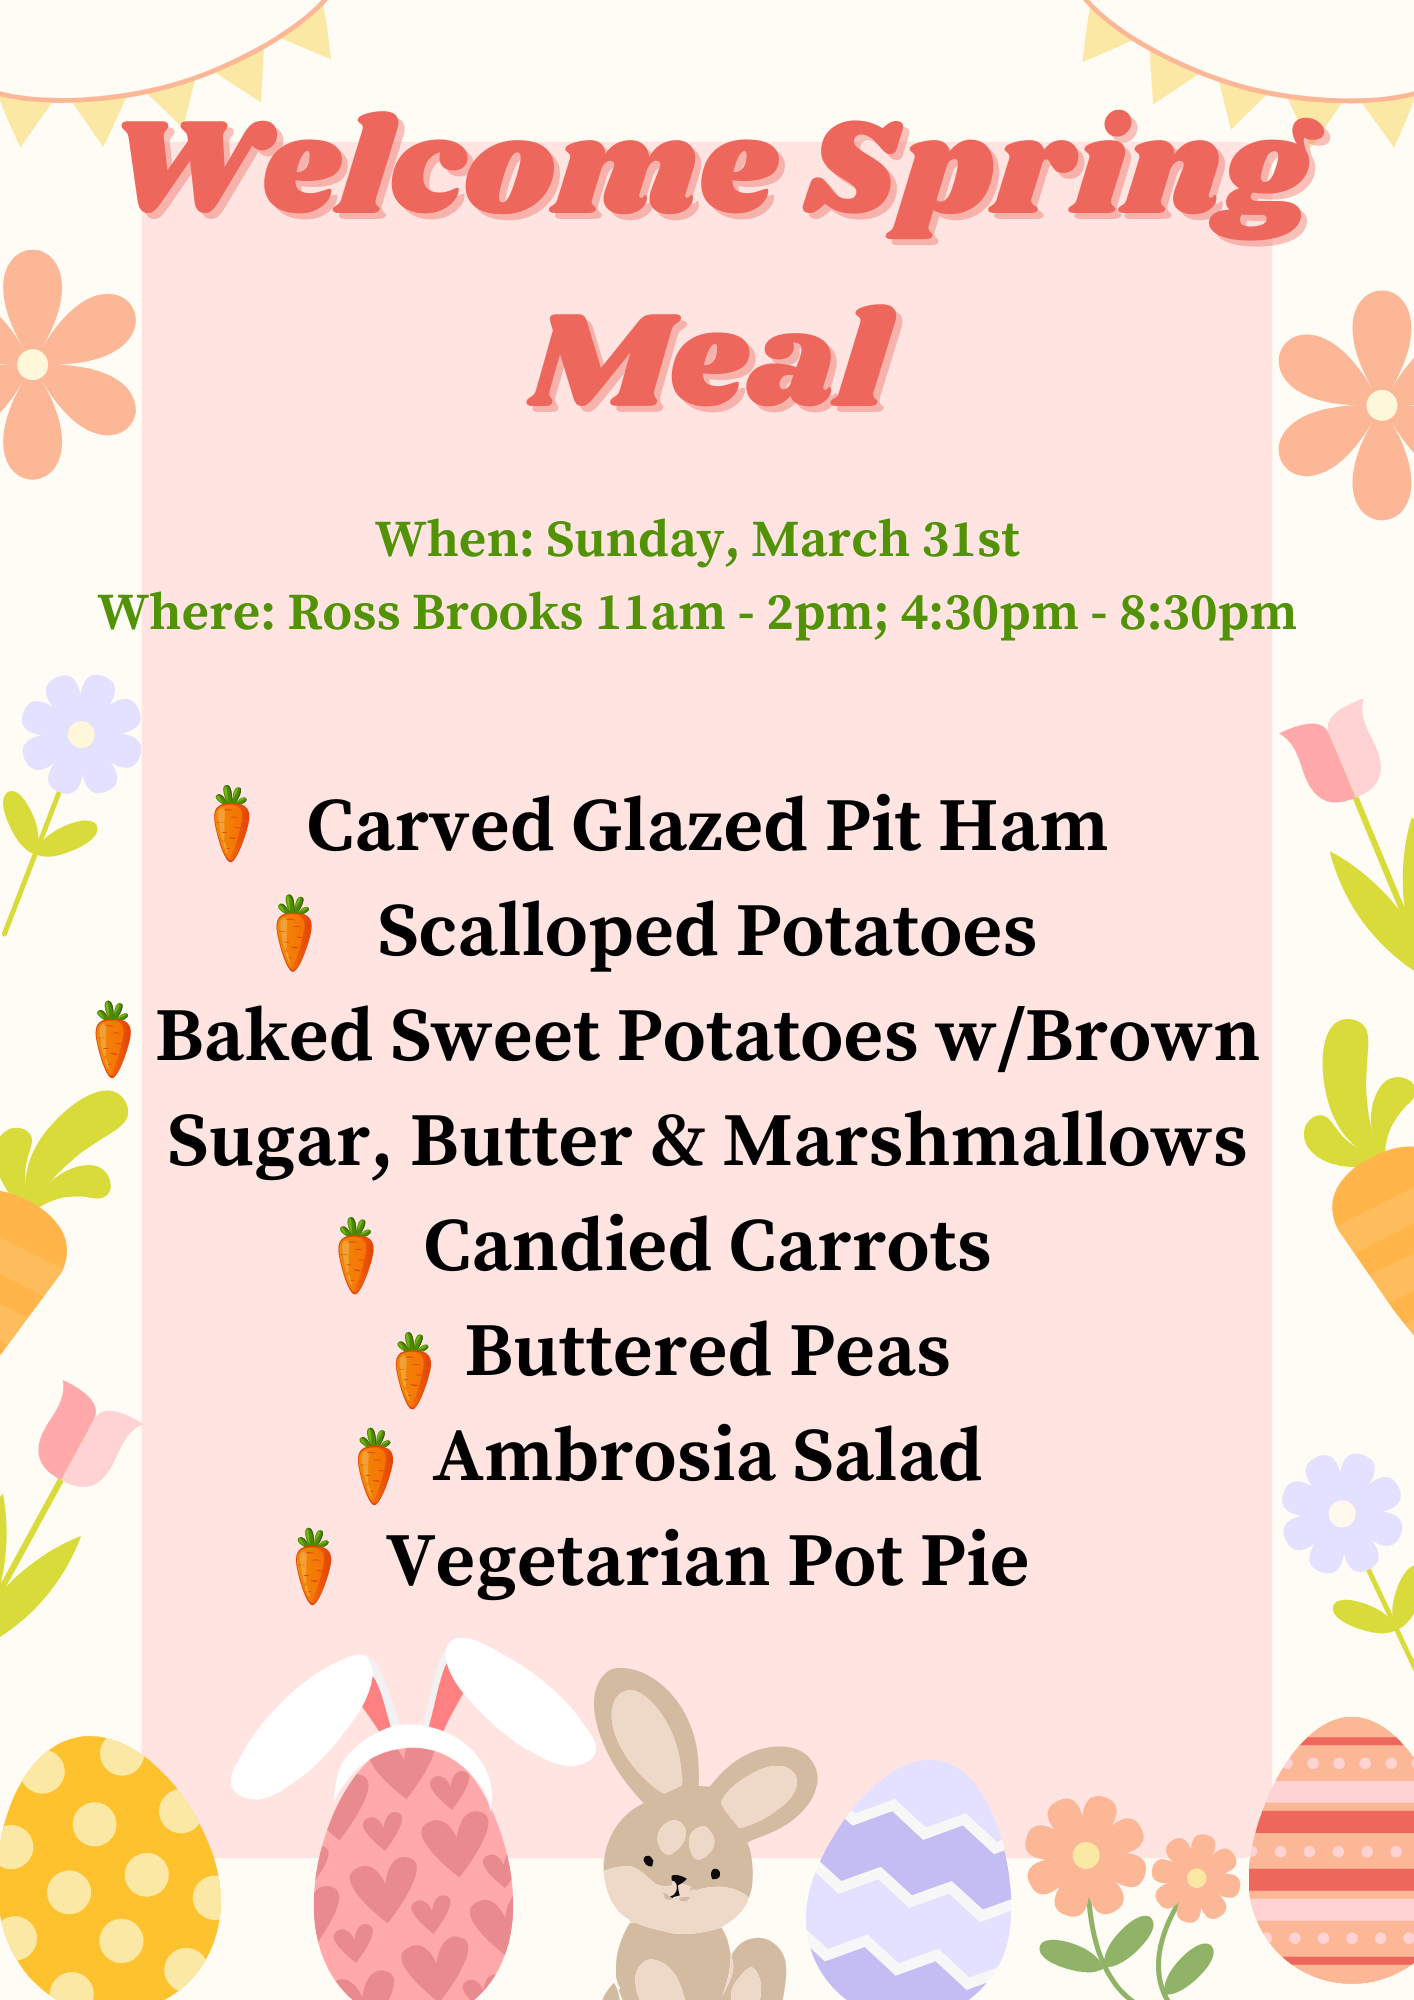 Welcome Spring Meal Sunday, March 31